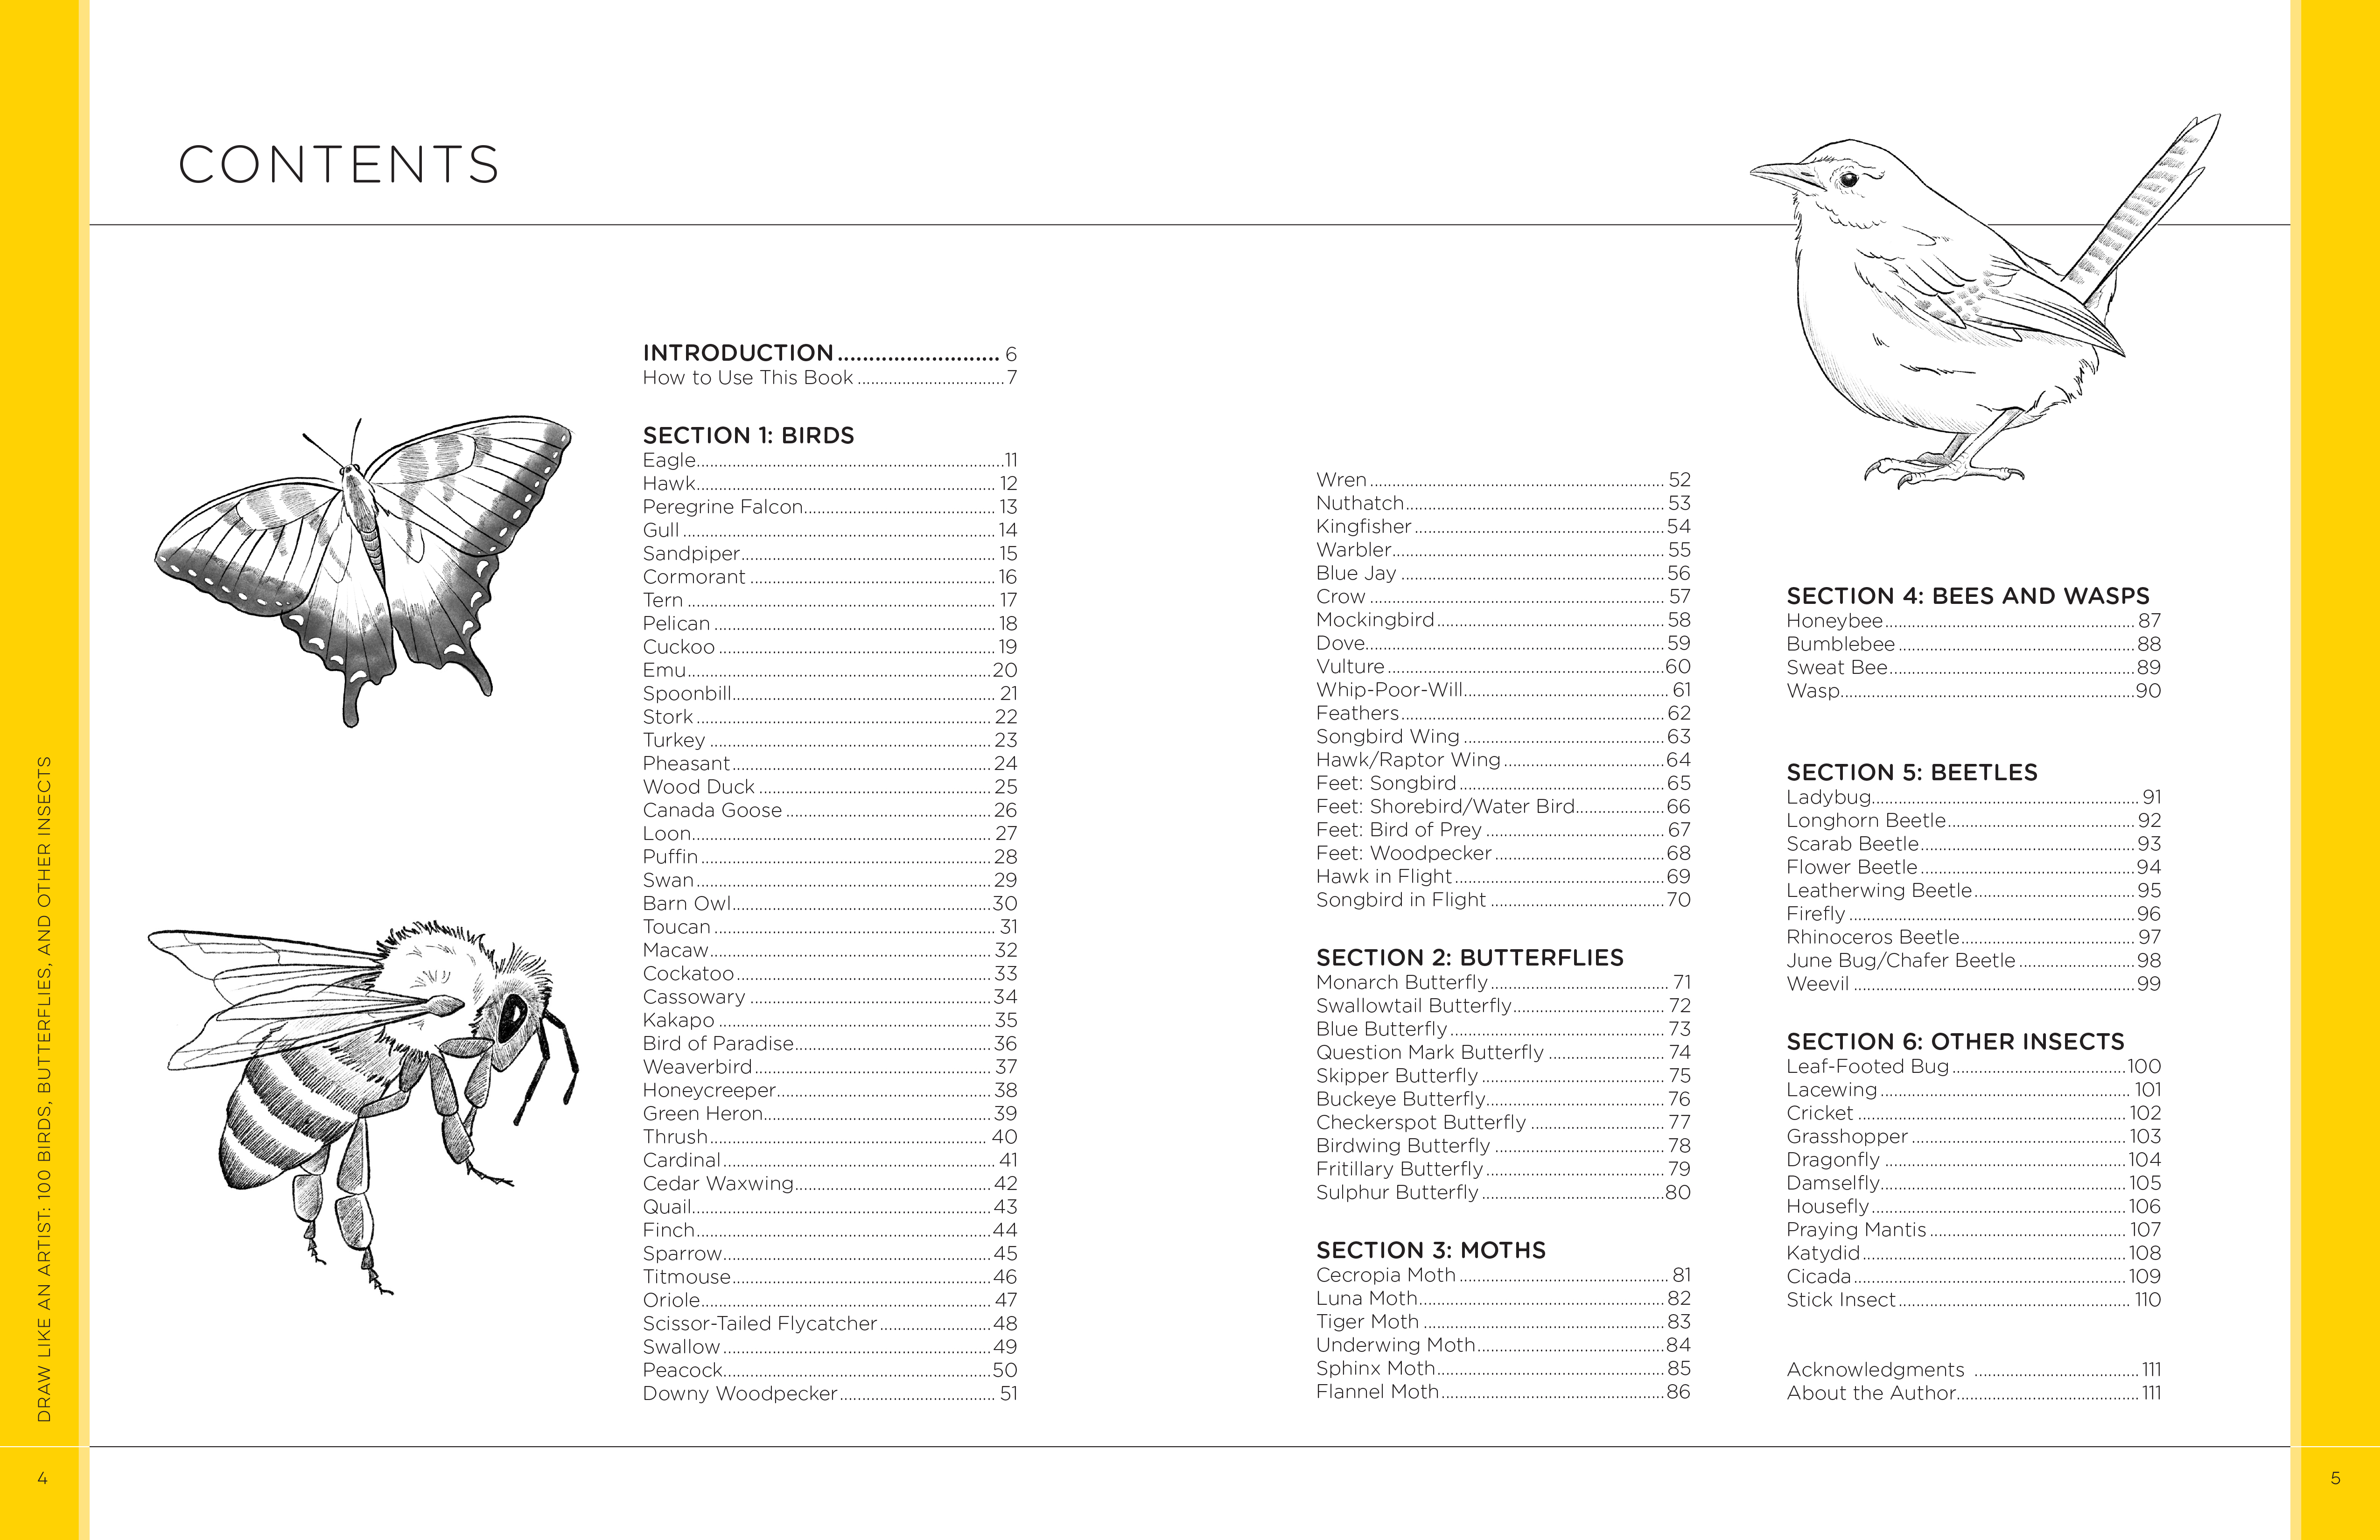 Draw Like an Artist: 100 Birds, Butterflies, and Other Insects